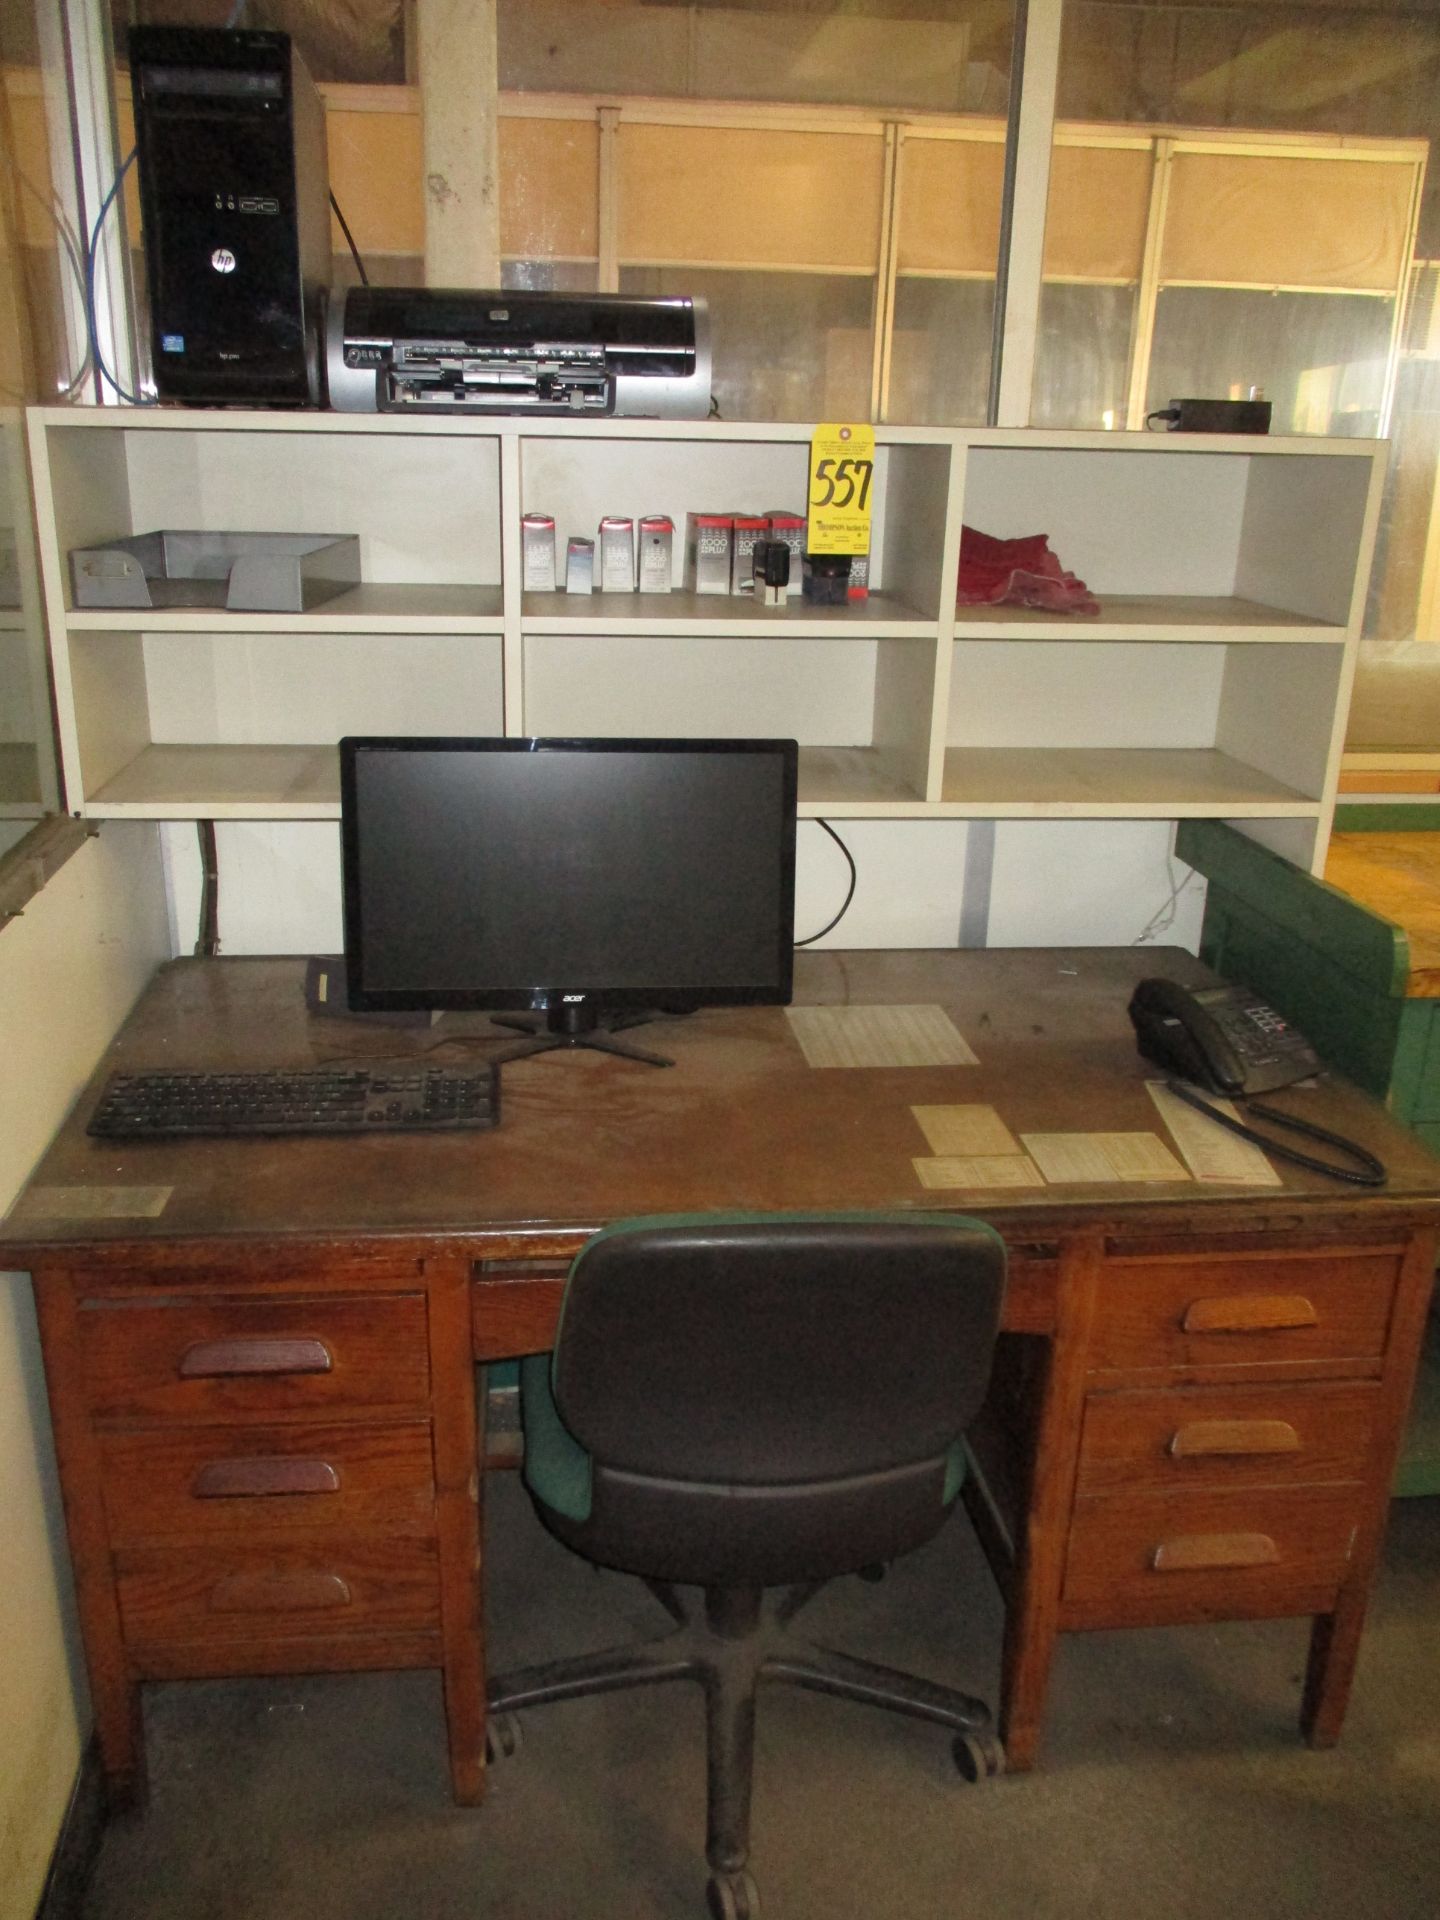 Desk, Chair, Computer, and Printer